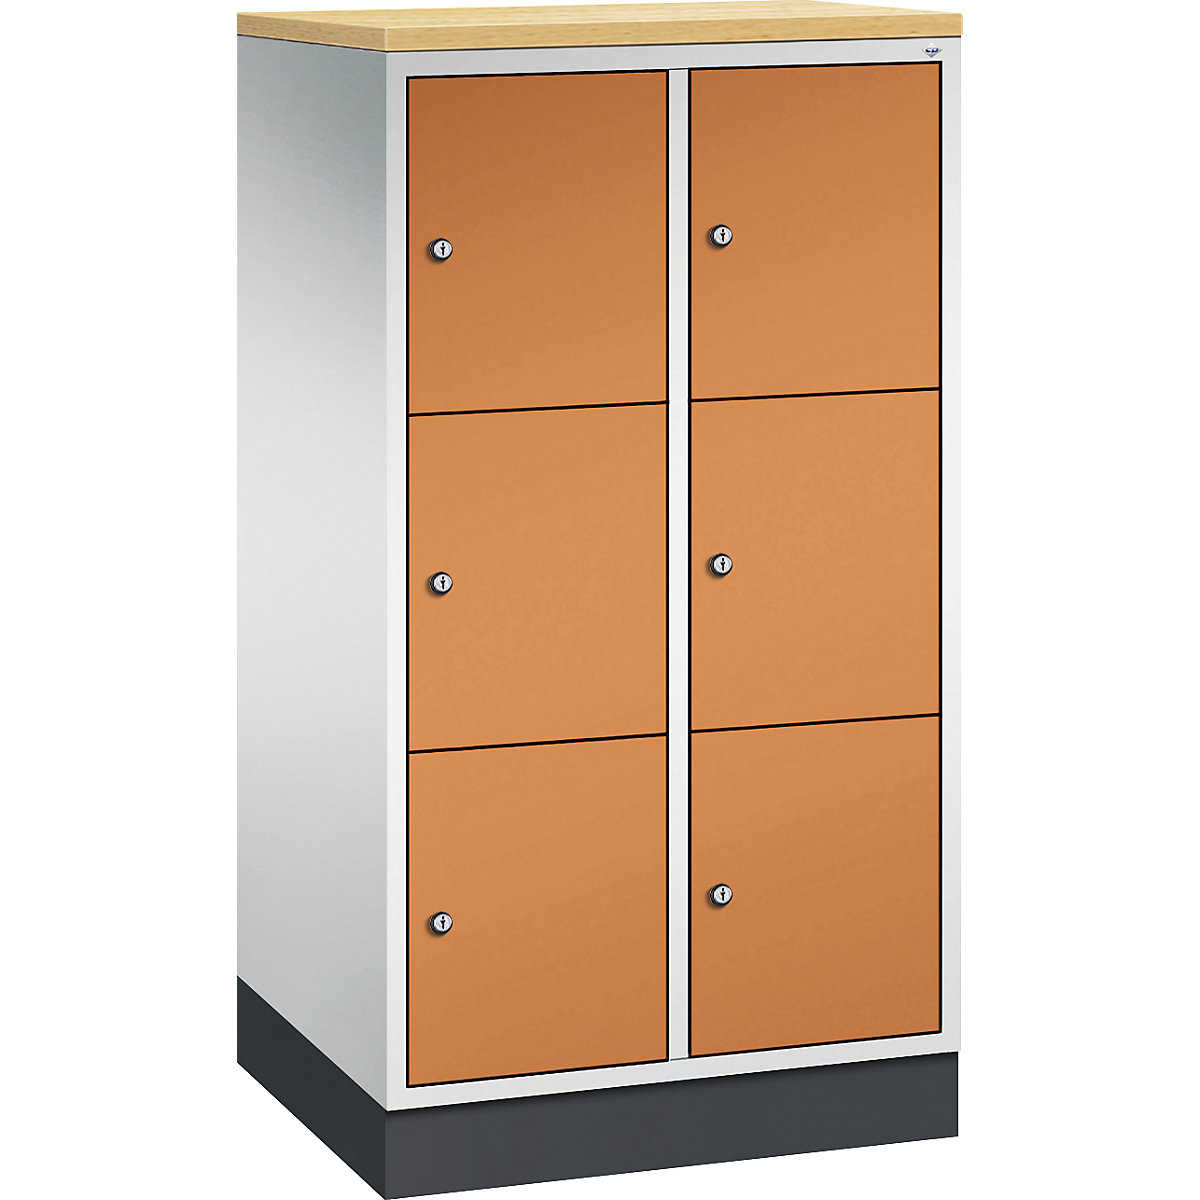 INTRO steel compartment locker, compartment height 345 mm – C+P, WxD 620 x 500 mm, 6 compartments, light grey body, yellow orange doors